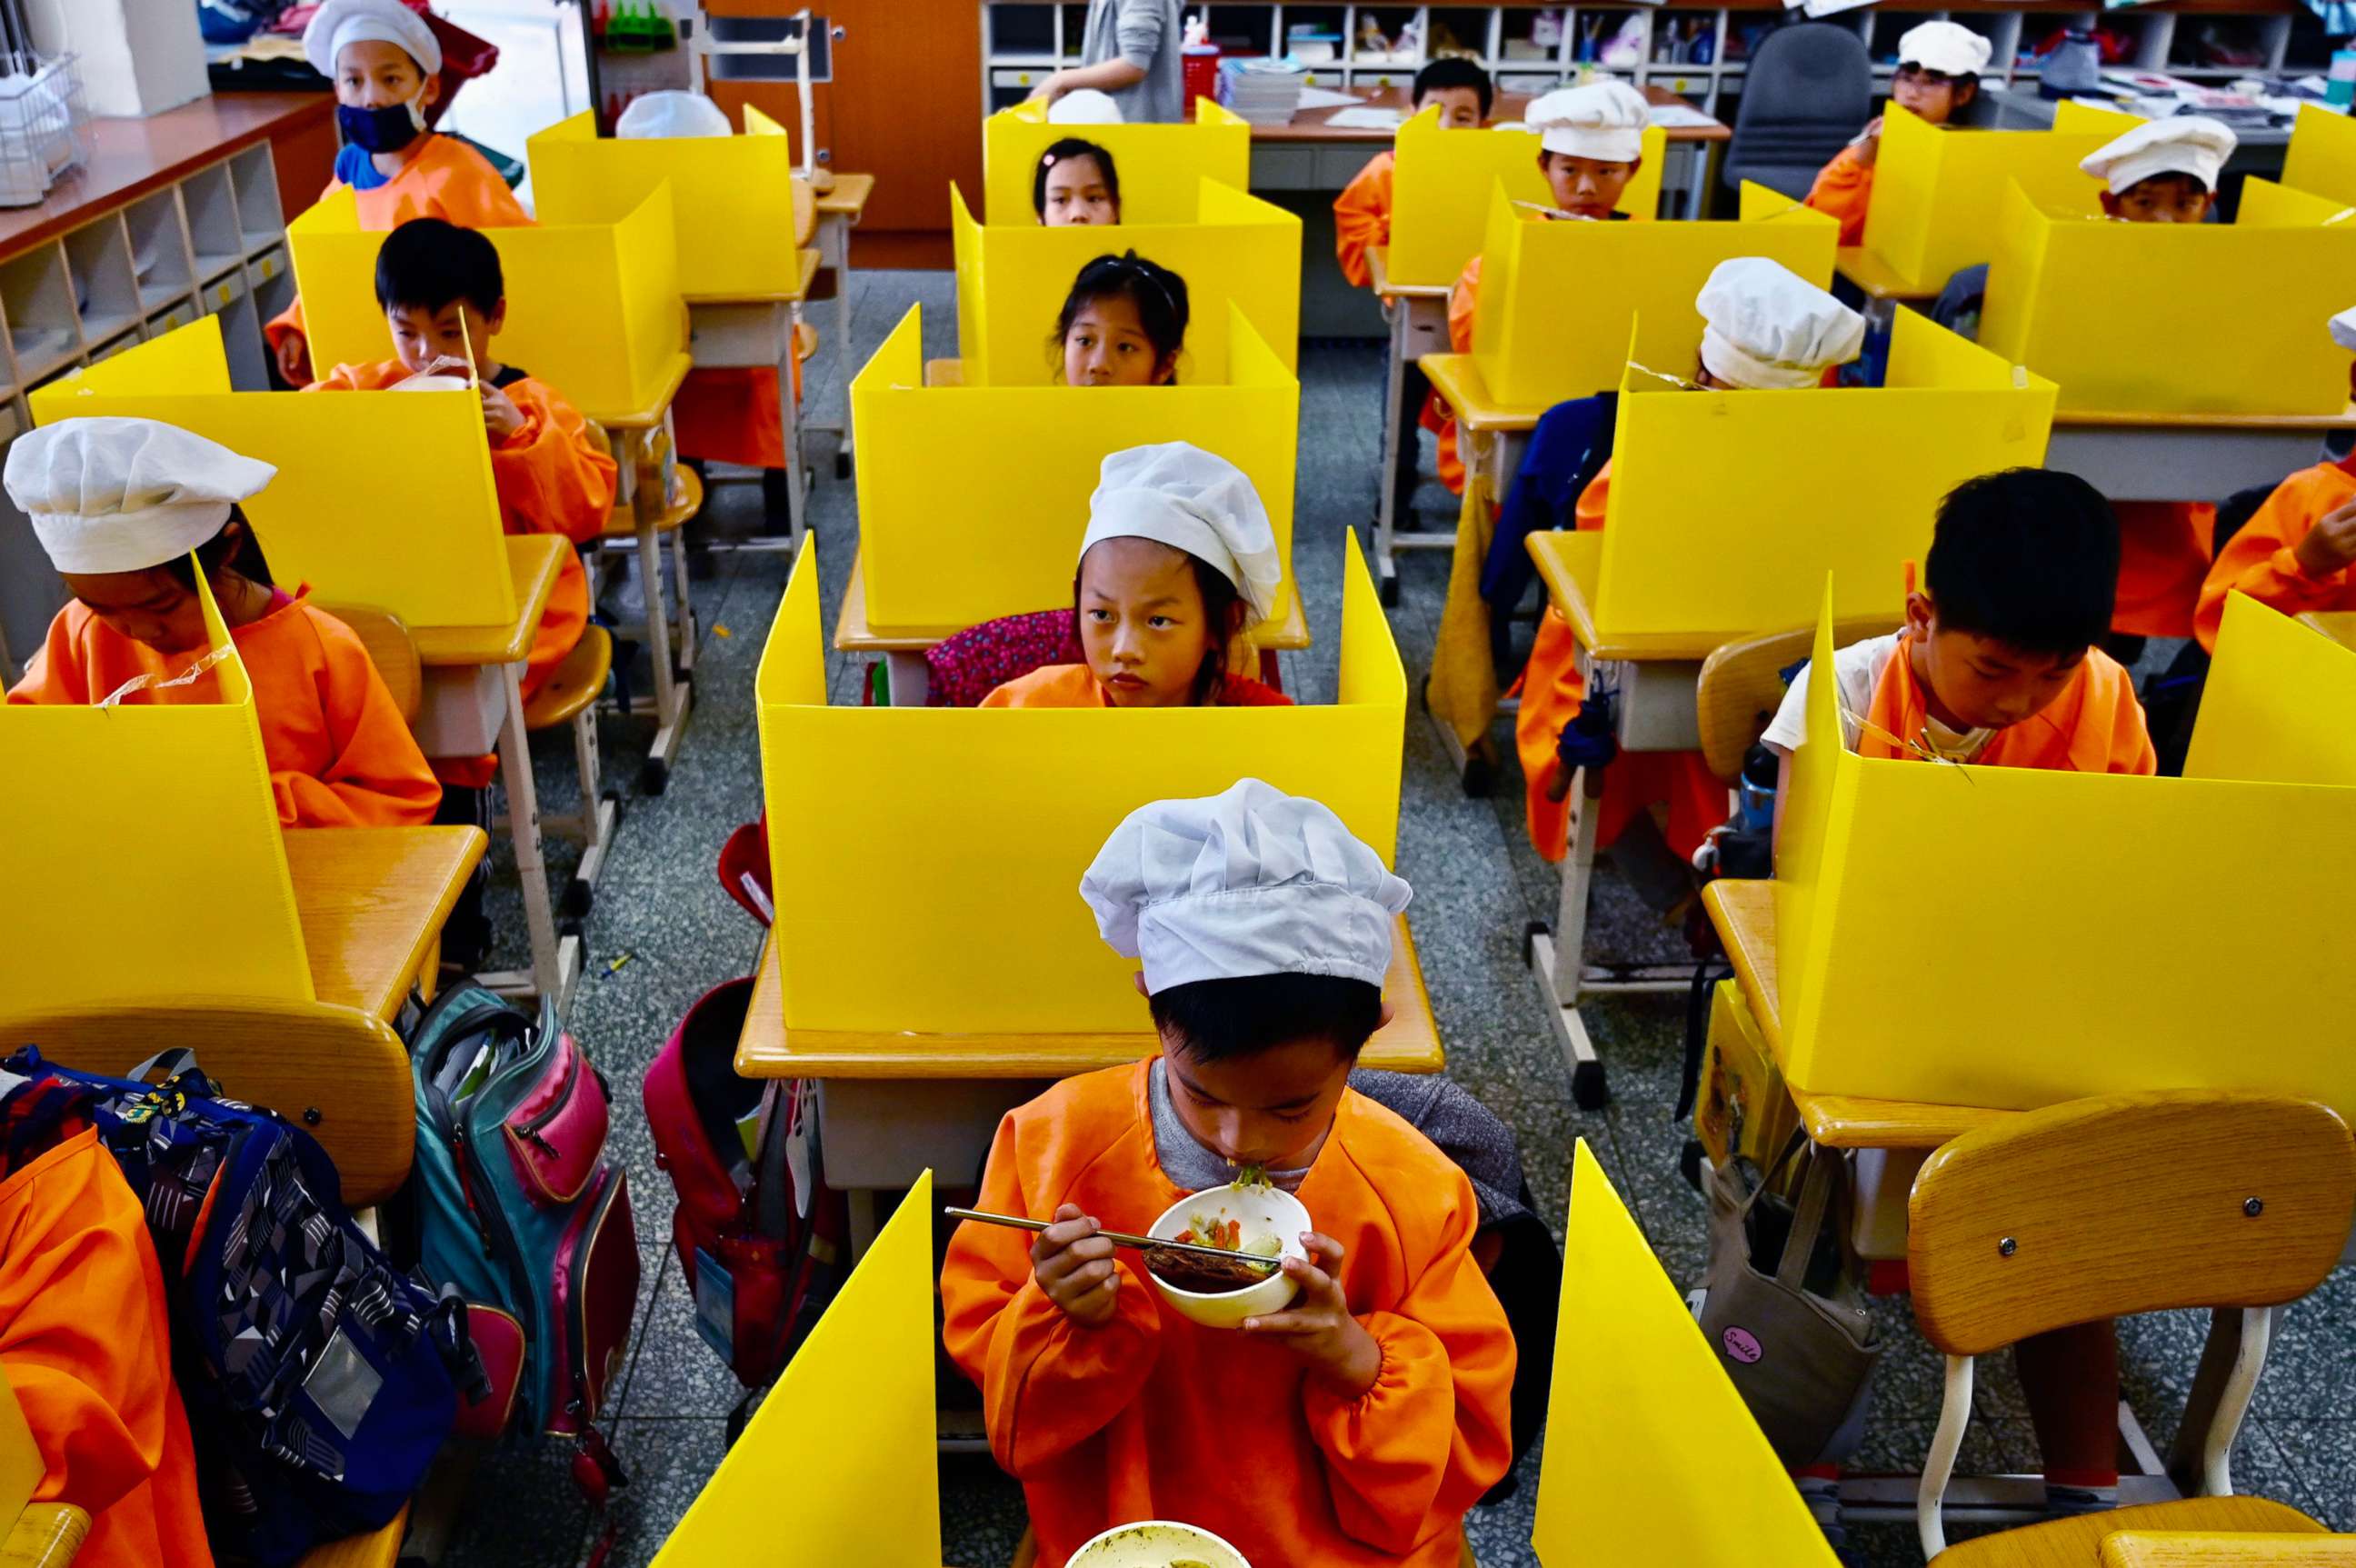 PHOTO:Students eat their lunch on desks with plastic partitions as a preventive measure to curb the spread of COVID-19 at Dajia Elementary School, in Taipei, on April 29, 2020.